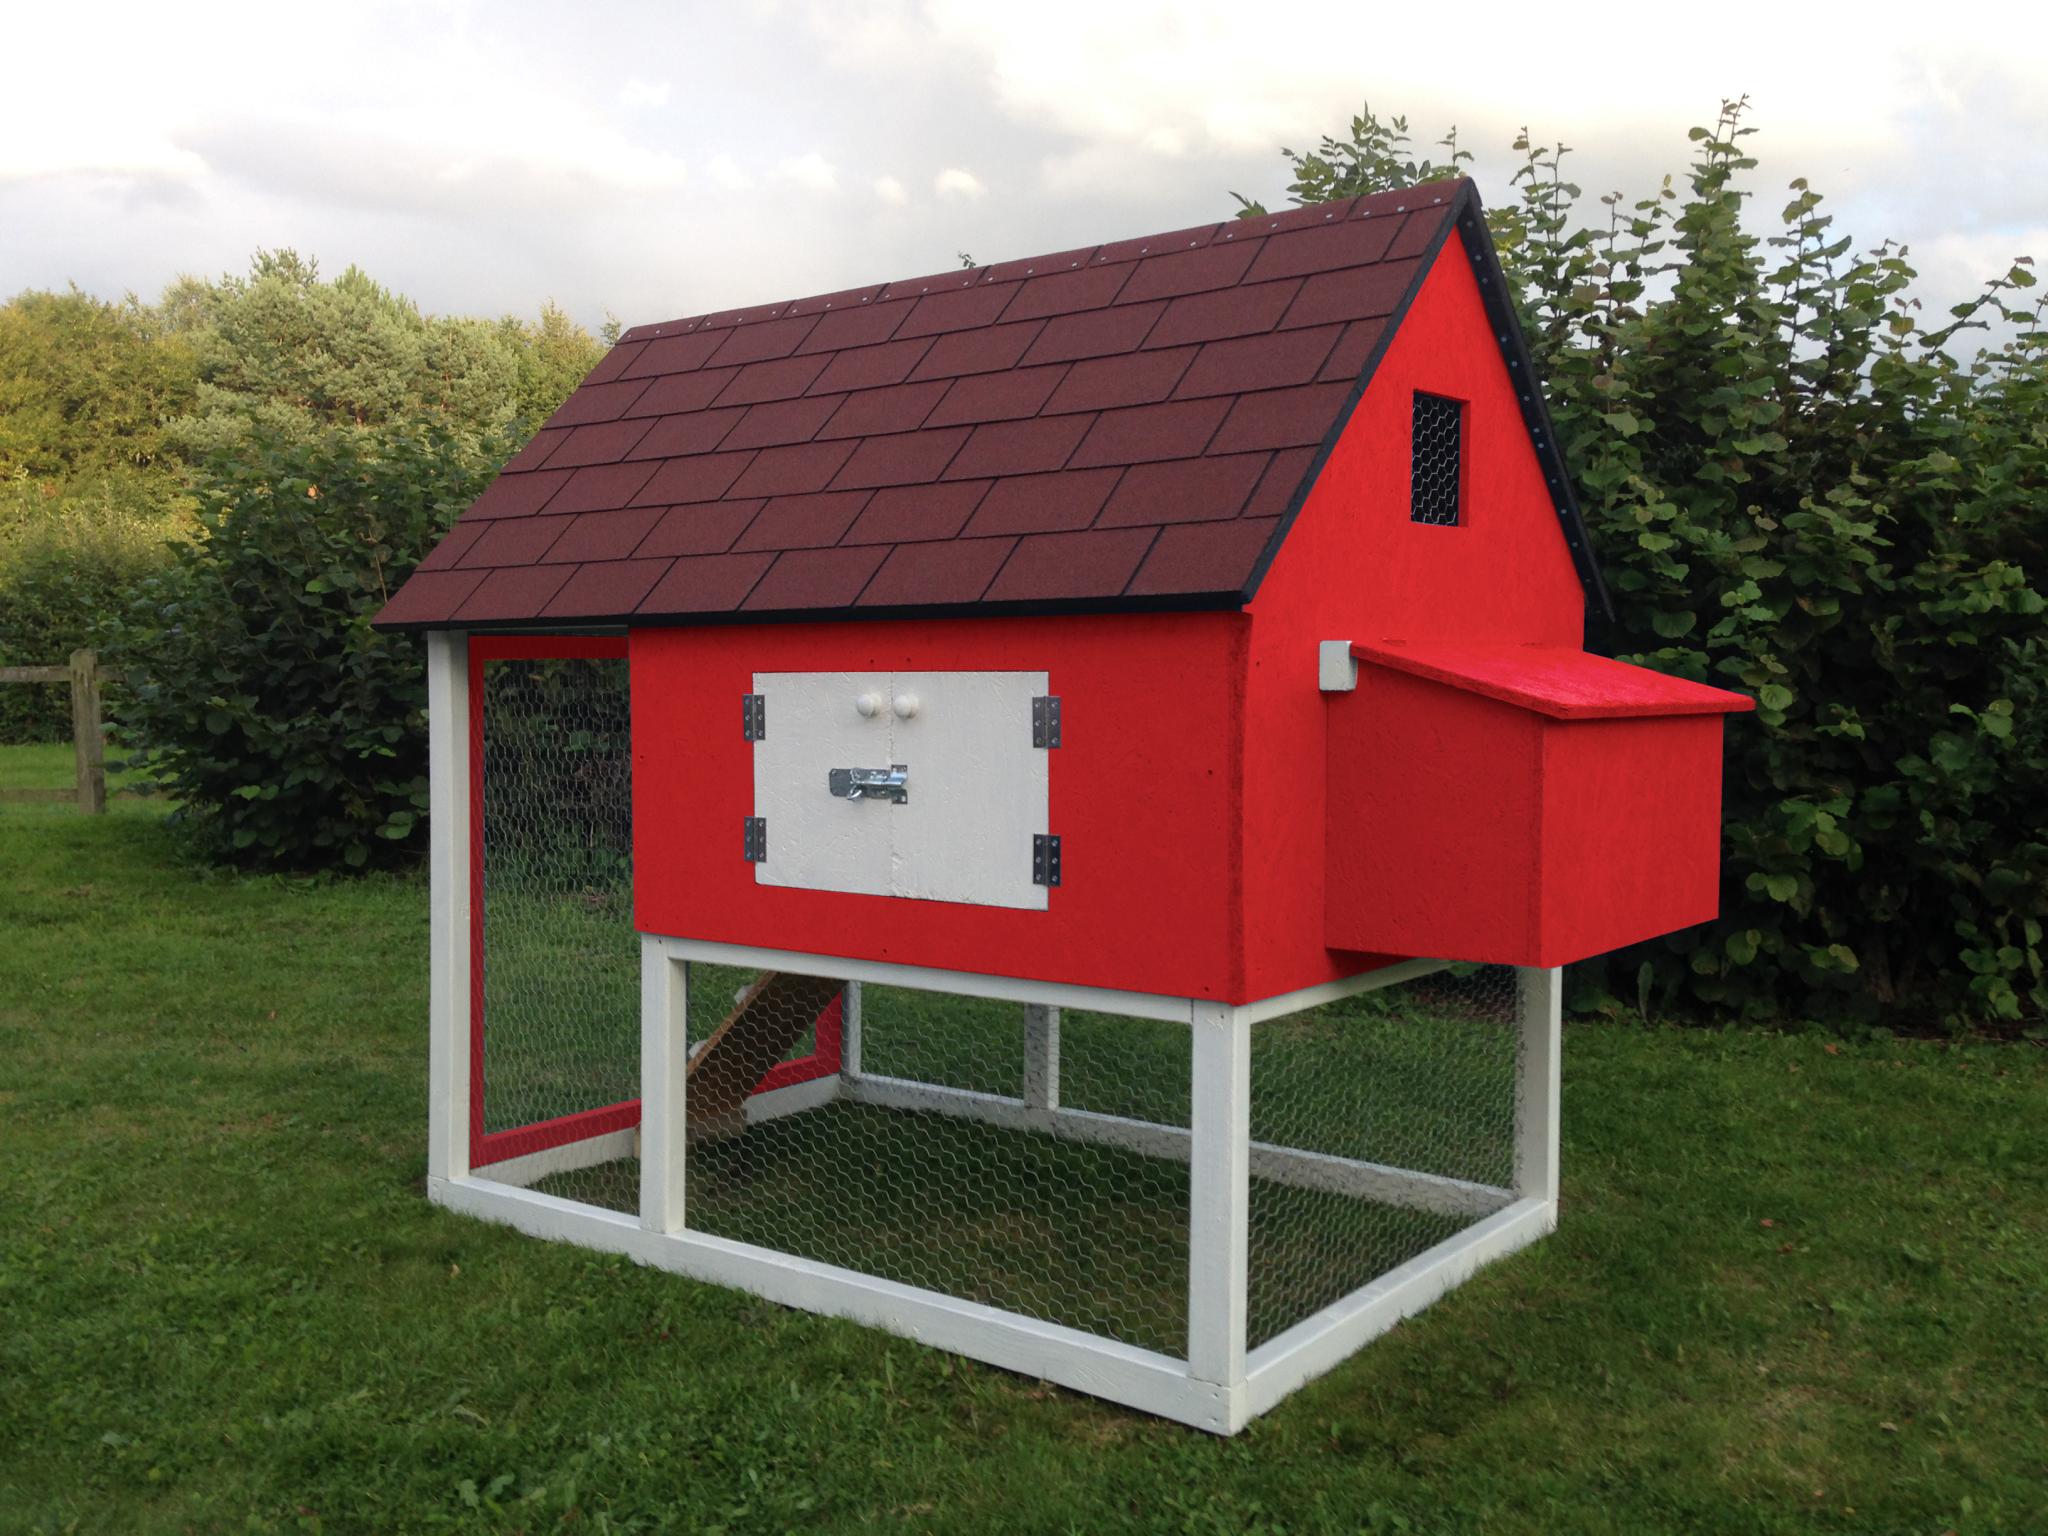 Above is a chicken coop that is doable for someone without too much DIY experience.